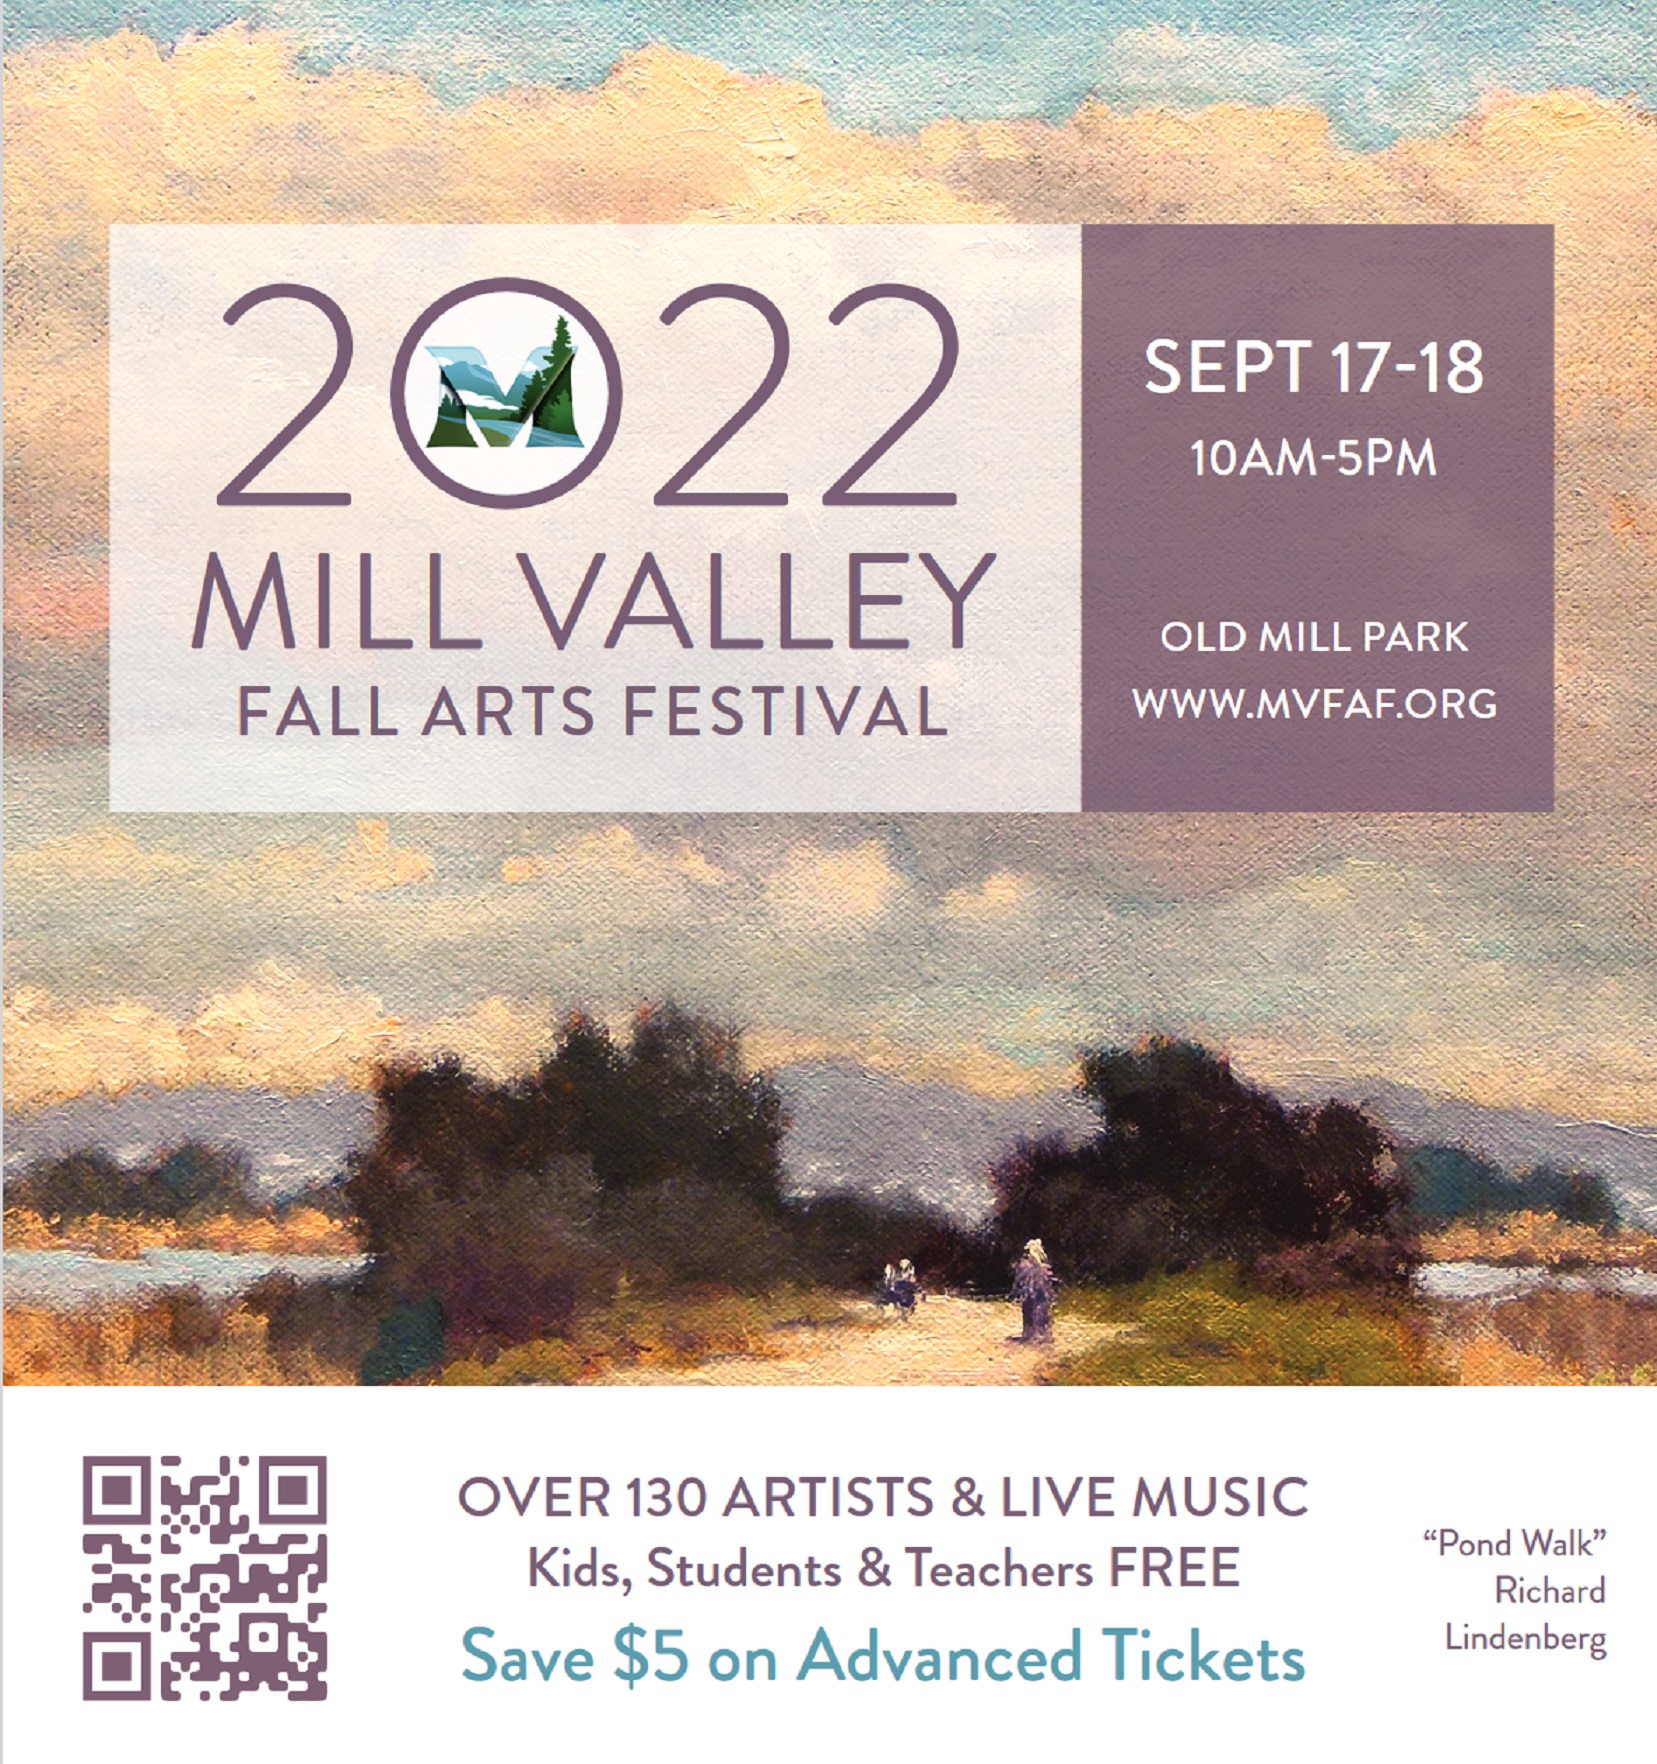 Music At The 65th Mill Valley Fall Arts Festival This Weekend